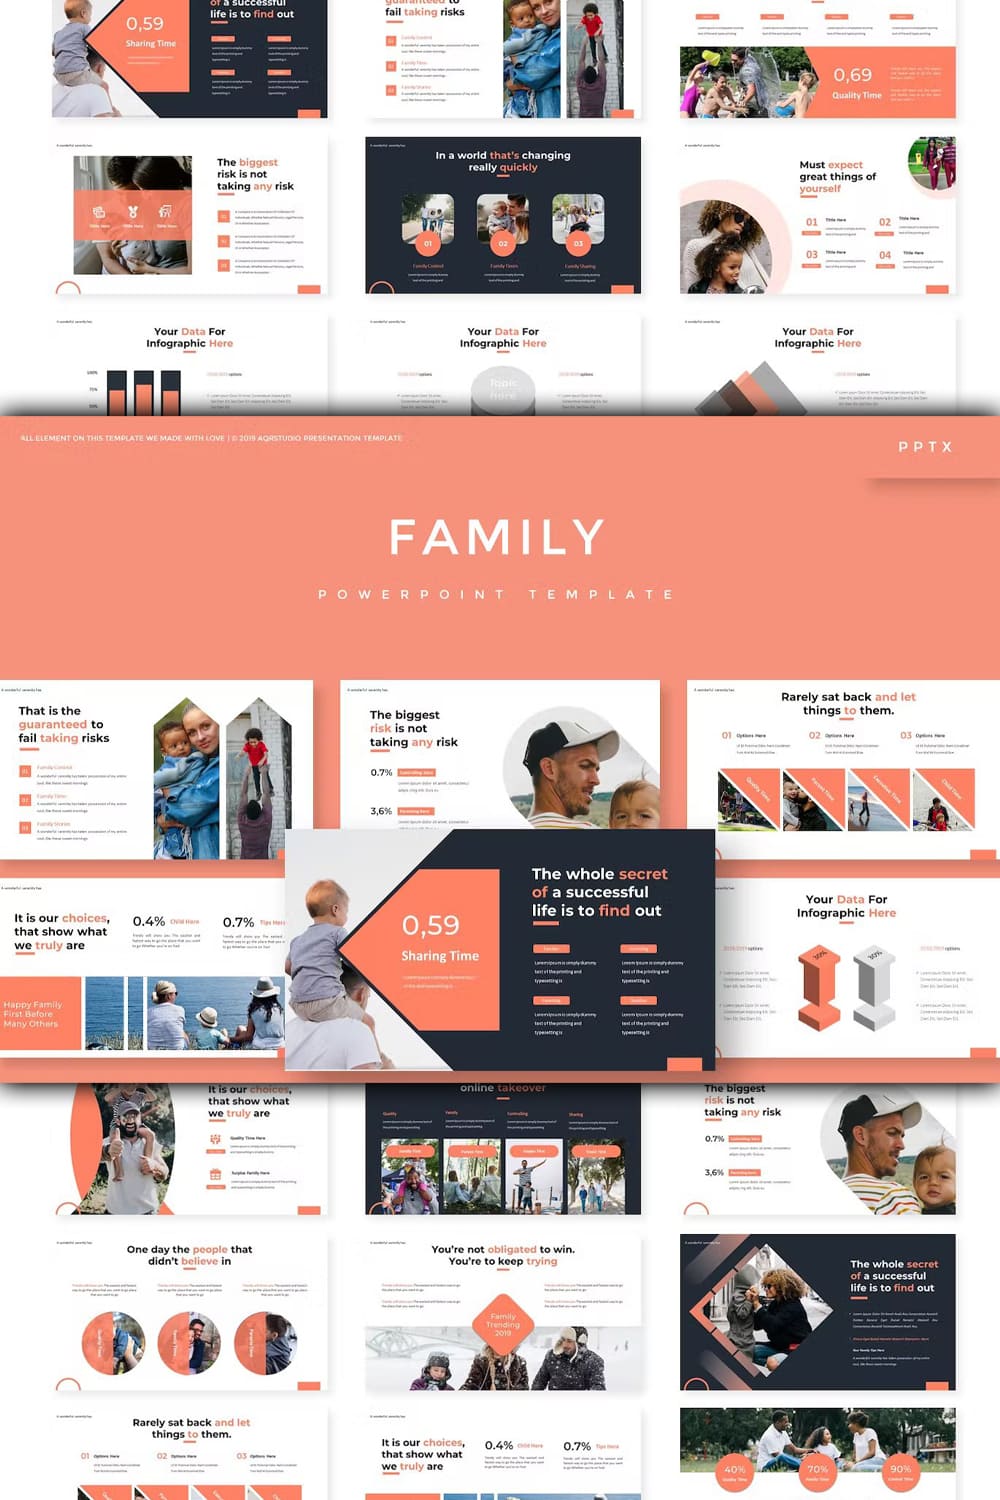 Family powerpoint template - pinterest image preview,